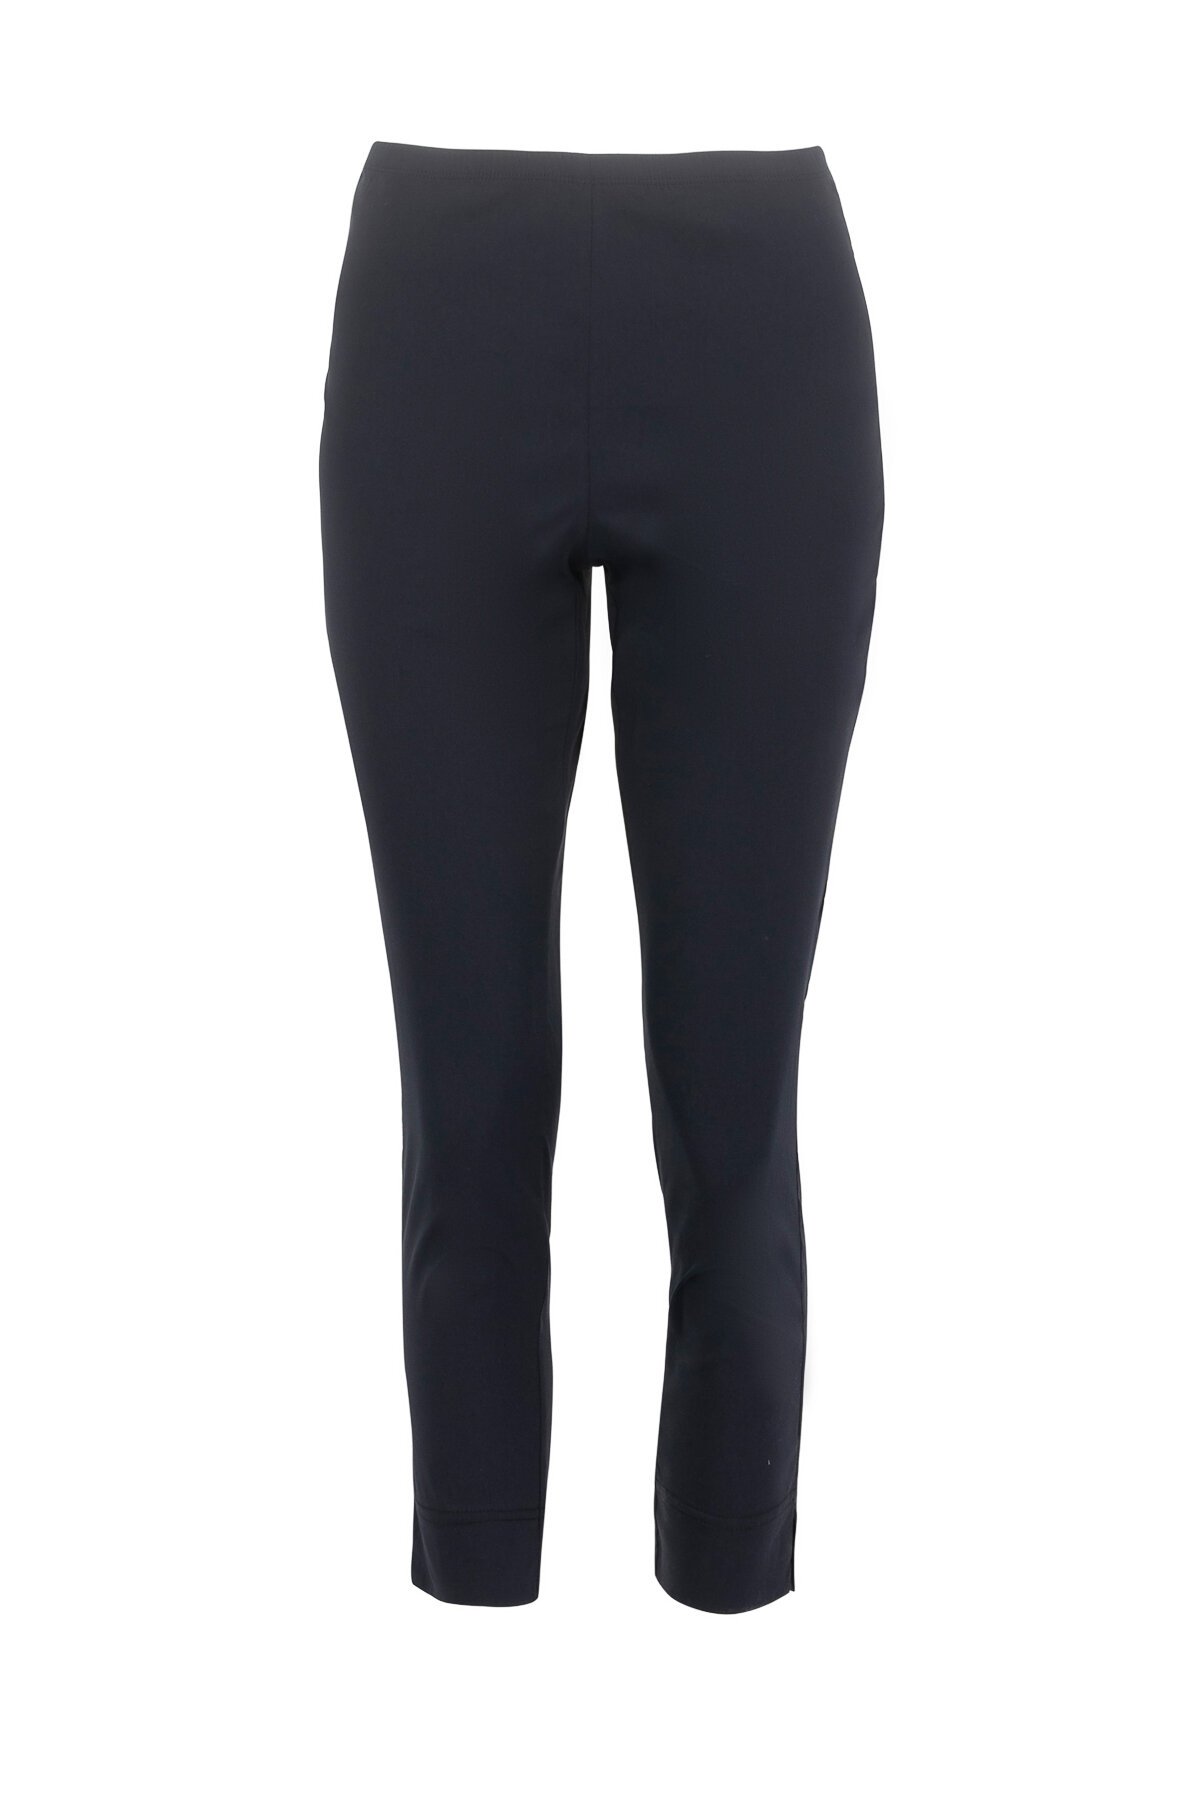 VERGE ACROBAT ECLIPSE PANT - Pants : Mainly Casual | Women's Clothing ...